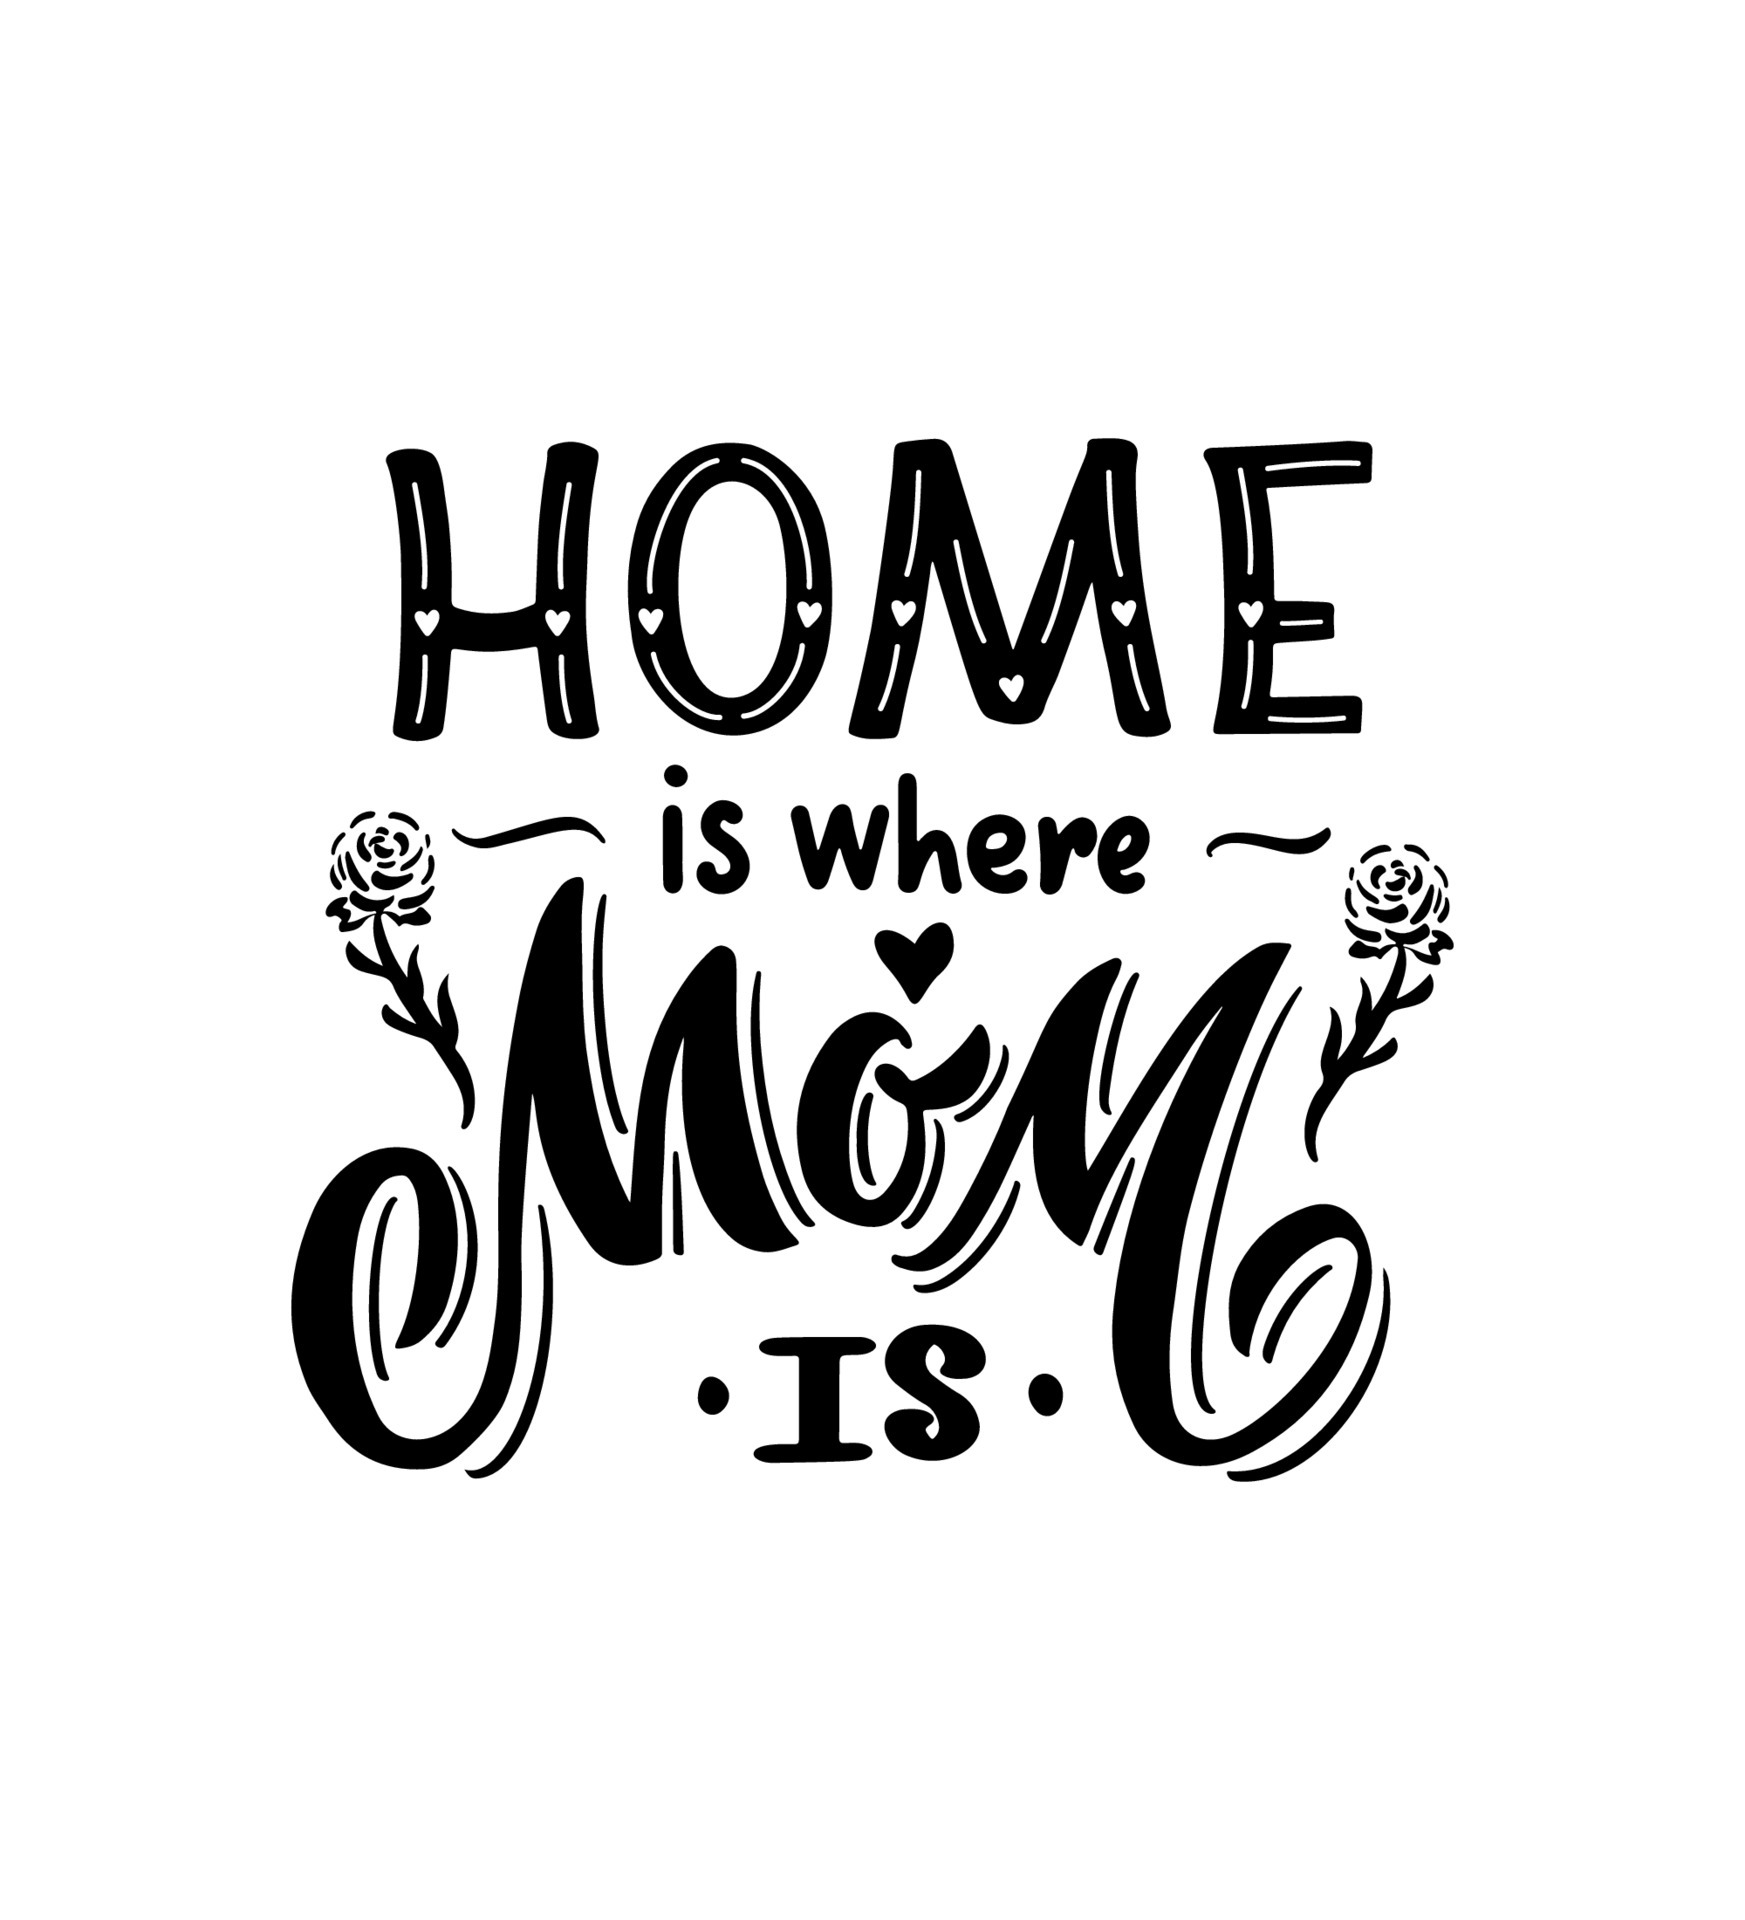 https://static.vecteezy.com/system/resources/previews/005/610/651/original/happy-mother-s-day-quote-home-is-where-mom-is-with-rose-hand-calligraphy-lettering-phrase-t-shirt-clothes-print-template-of-poster-greeting-card-banner-invitation-mug-black-color-vector.jpg